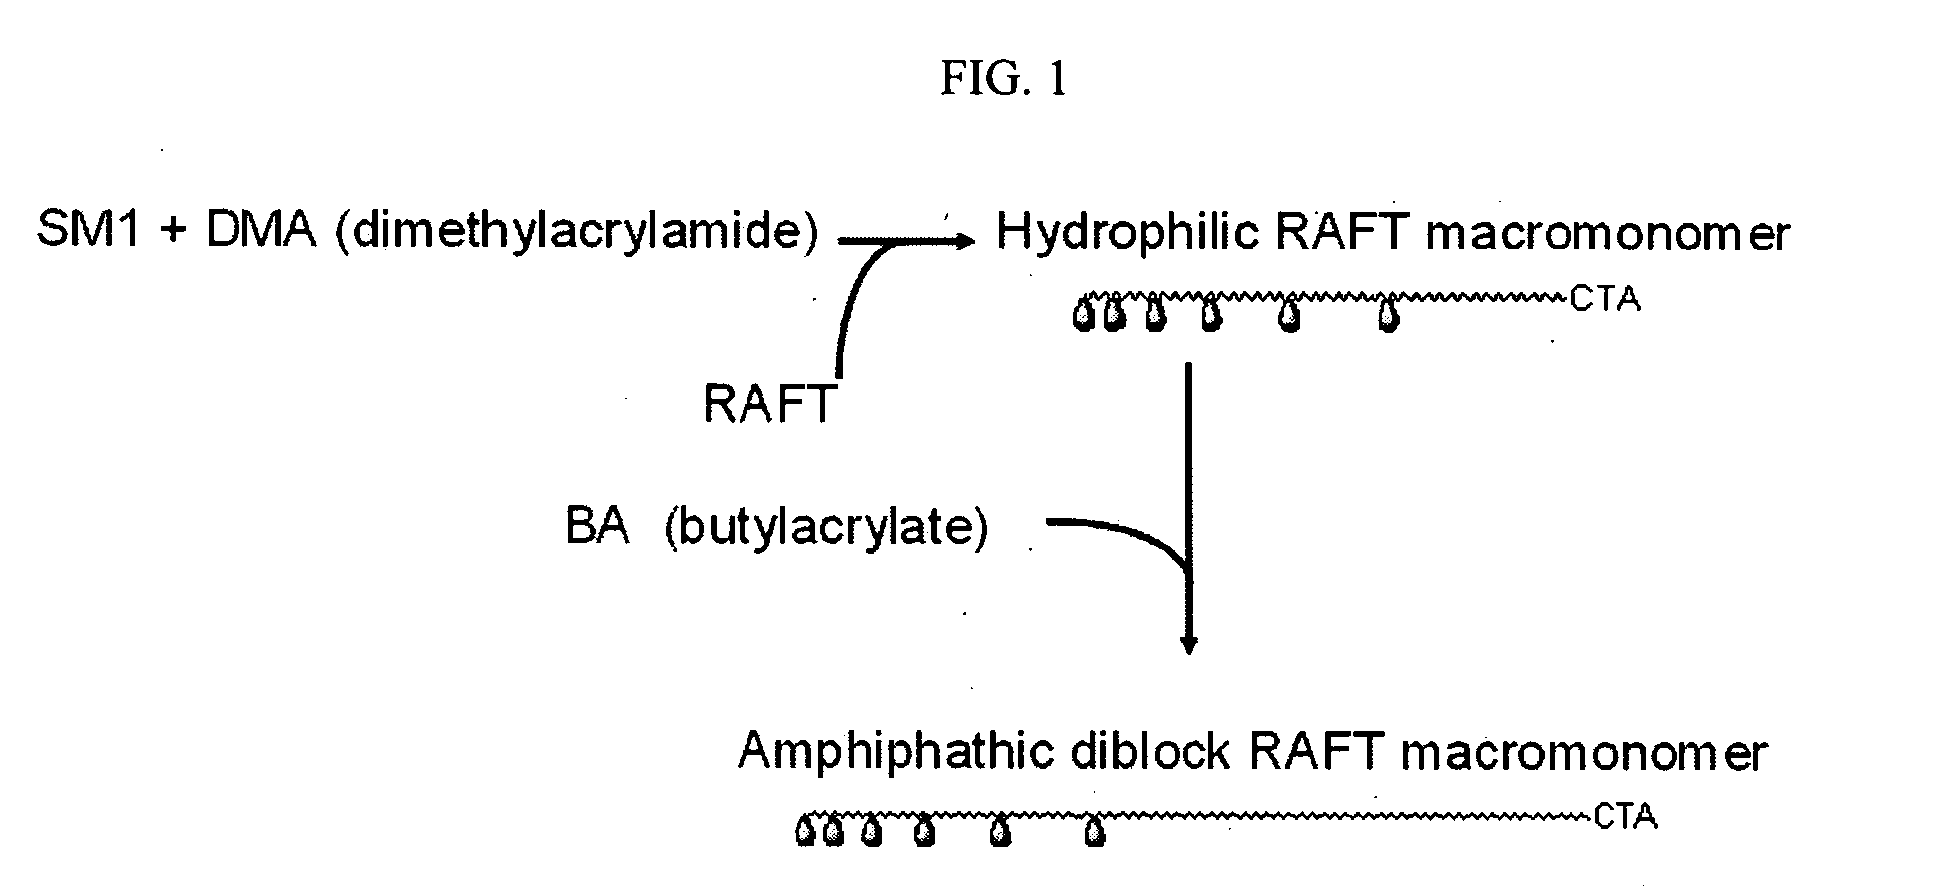 Toxin binding compositions